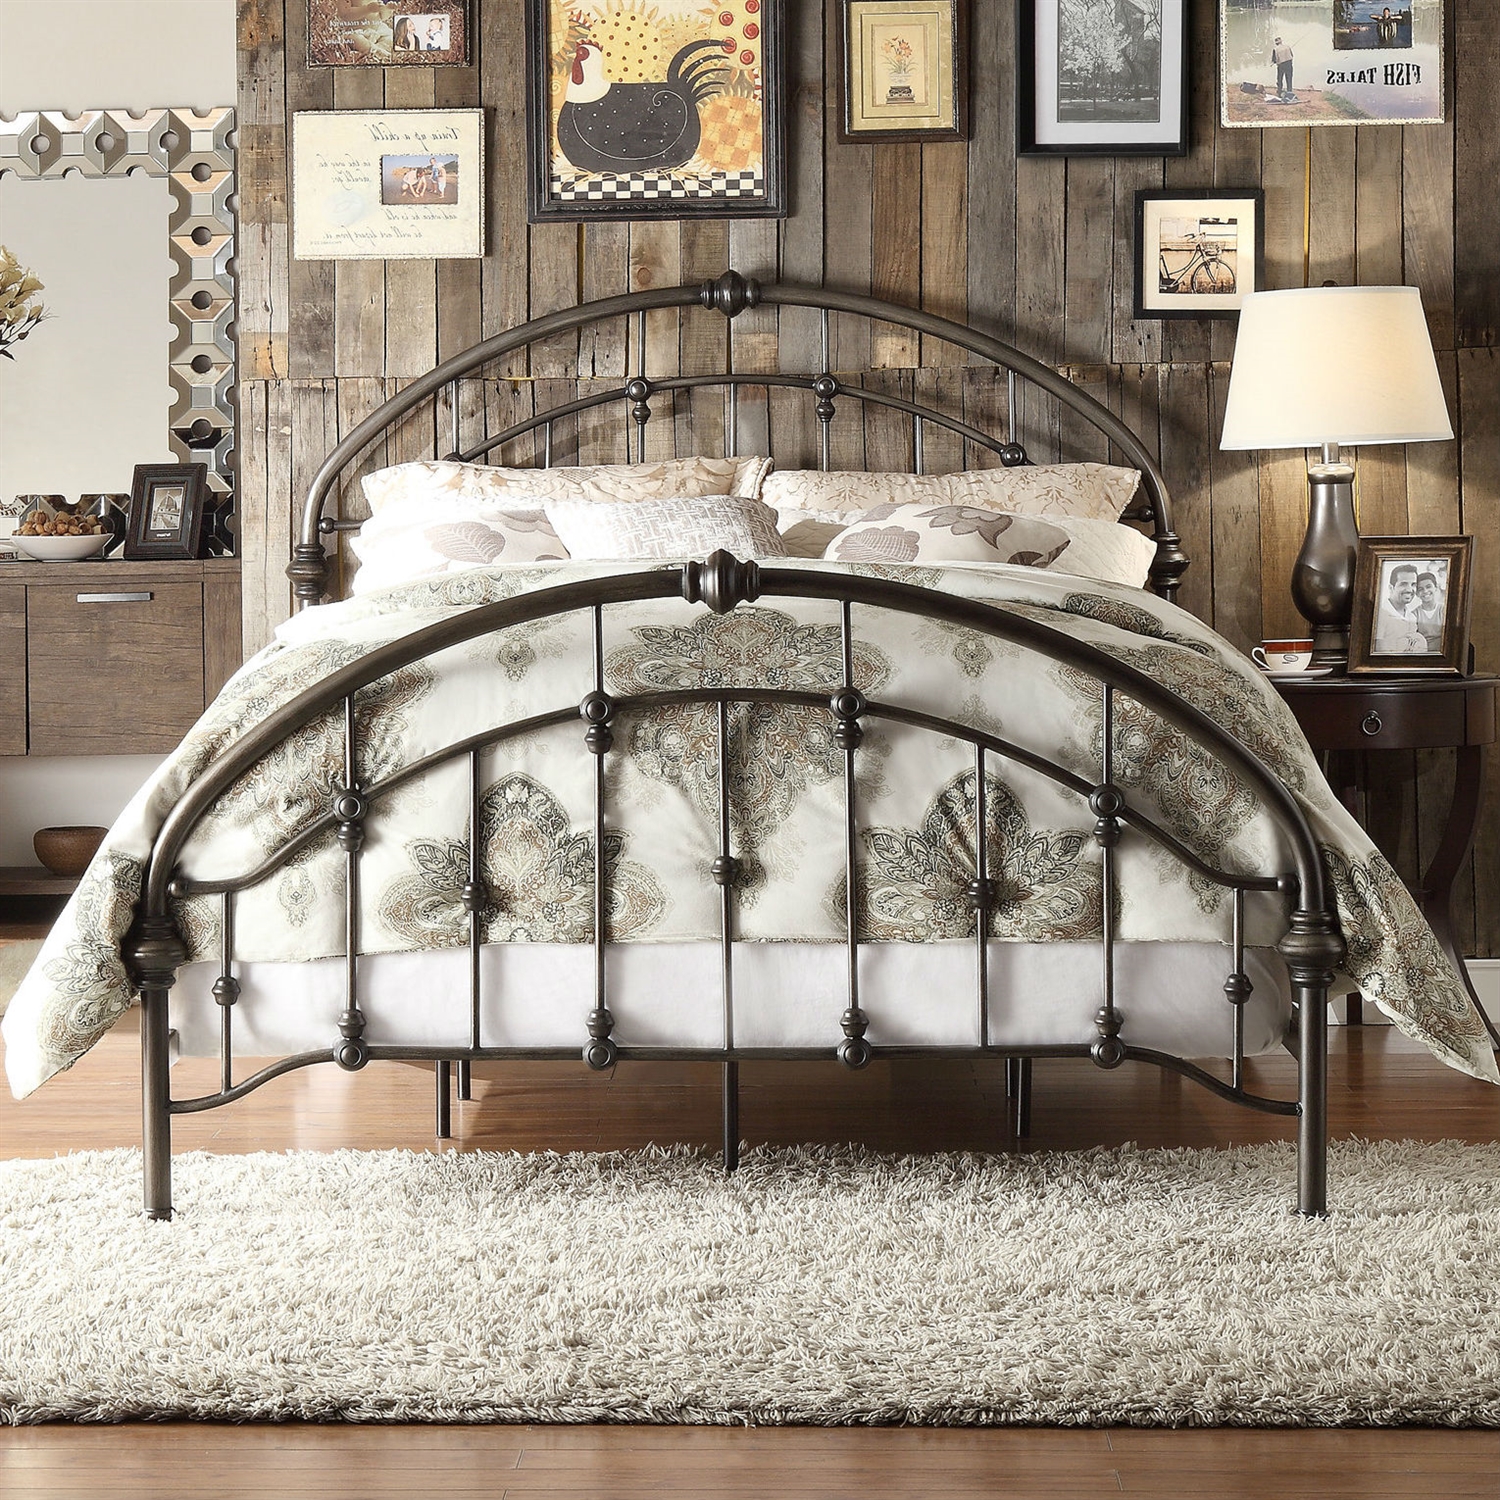 King size Antique Dark Bronze Metal Bed with Arch Headboard and Footboard